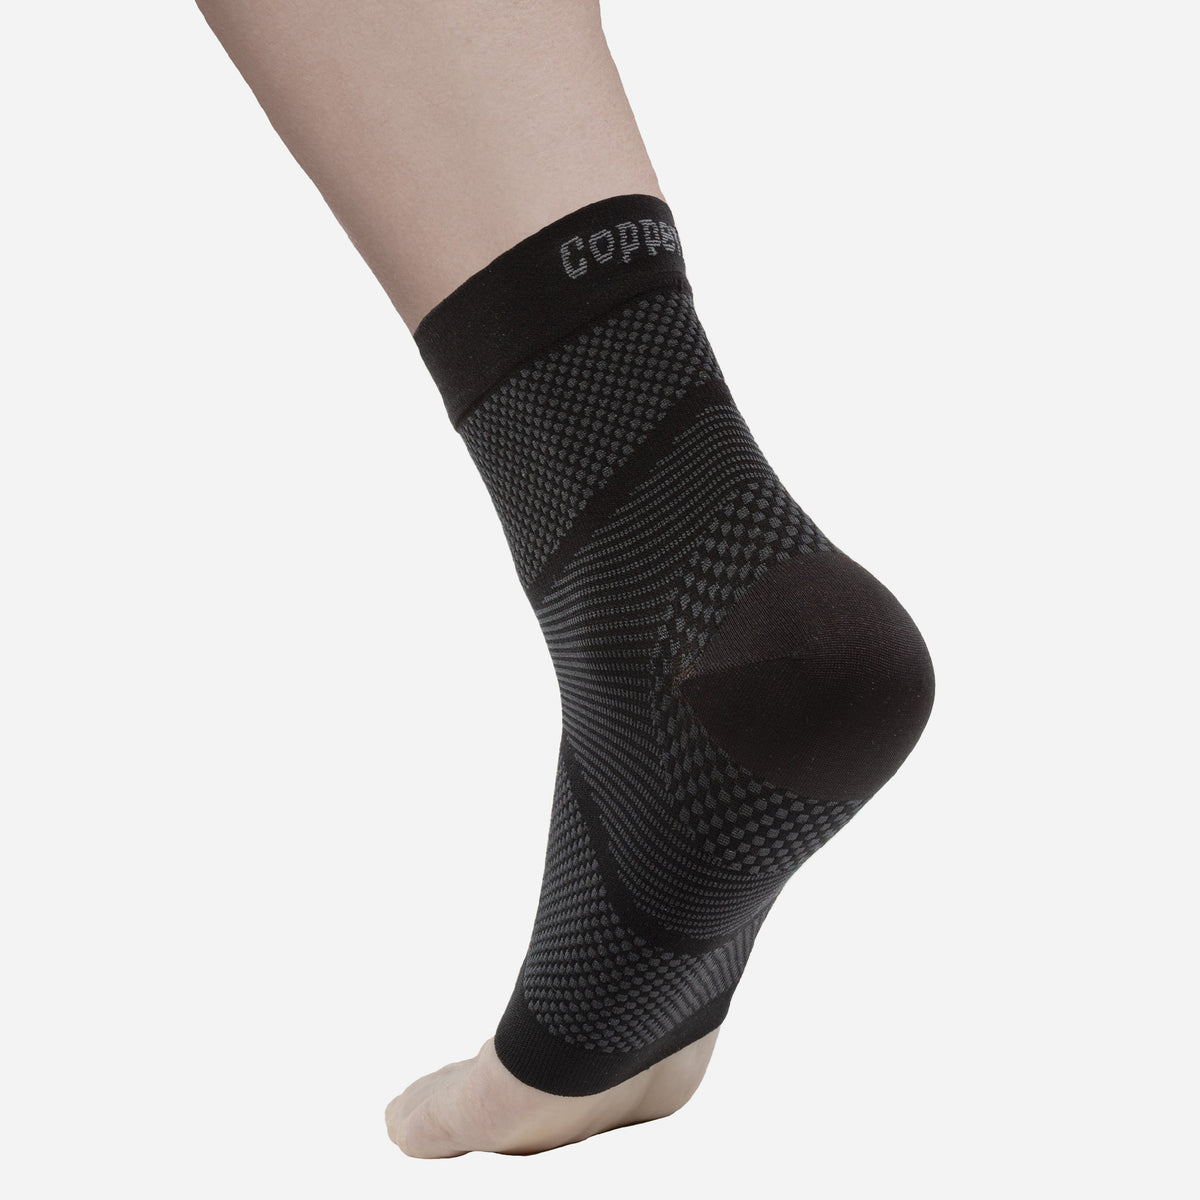 Elite Series Ankle Compression Sleeve - Copper Fit